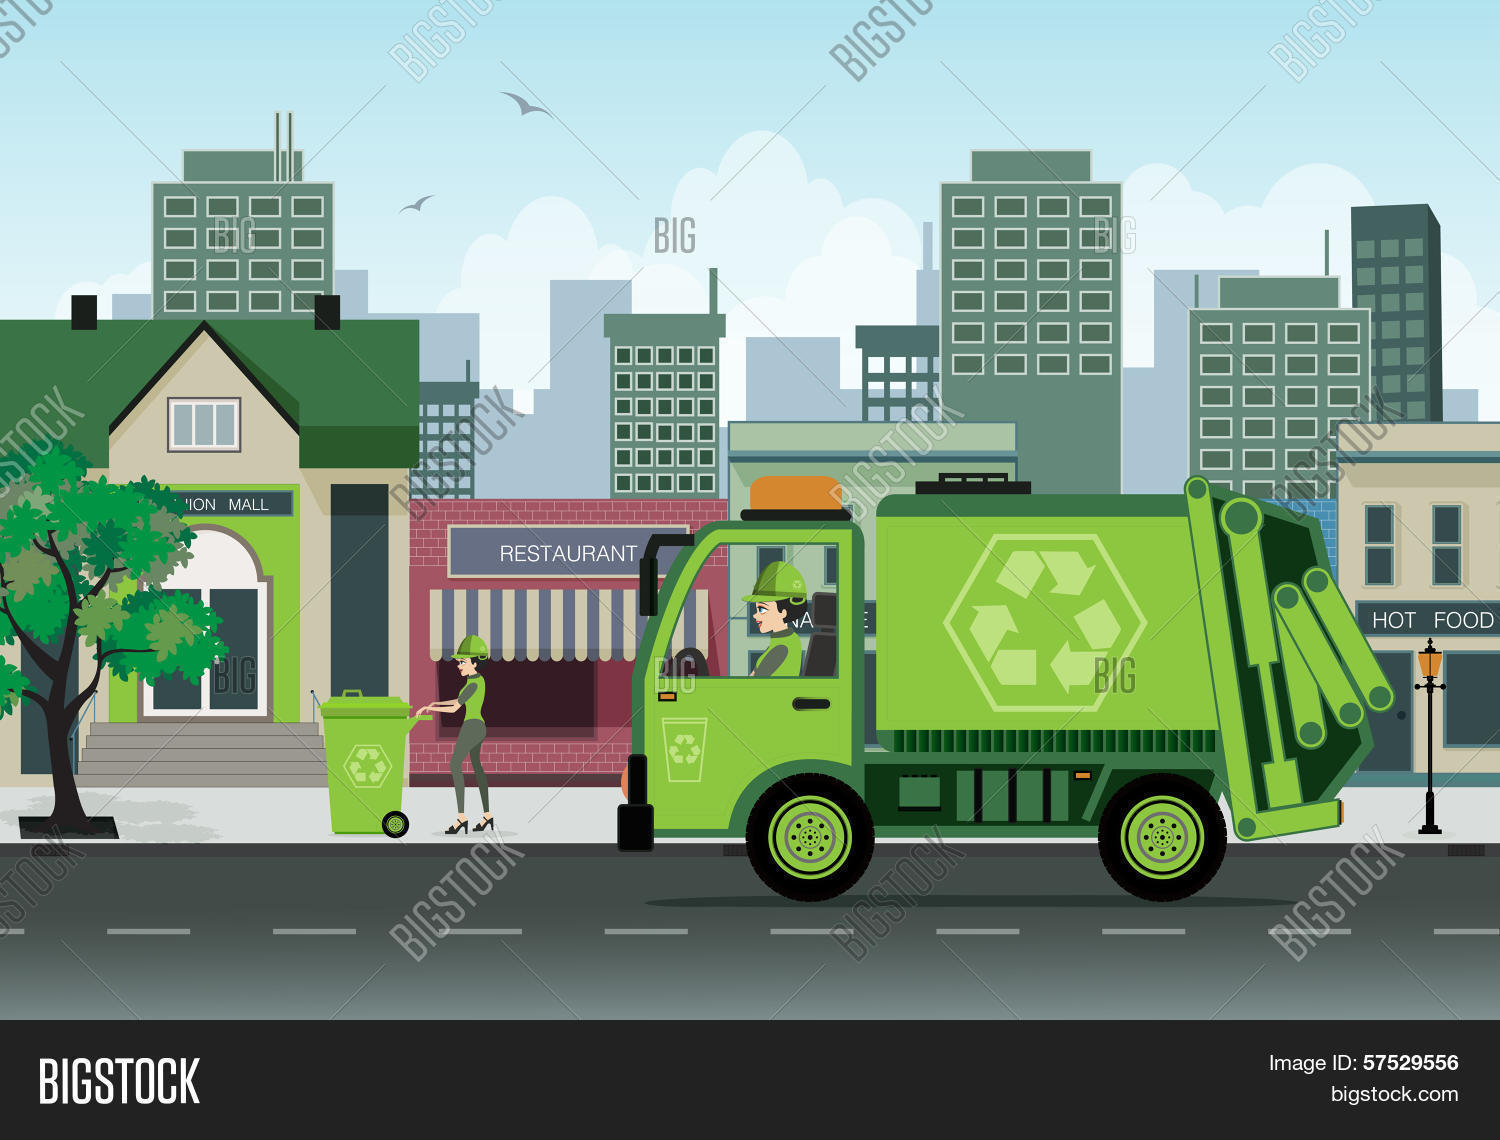 r141-recycling-collection.jpg